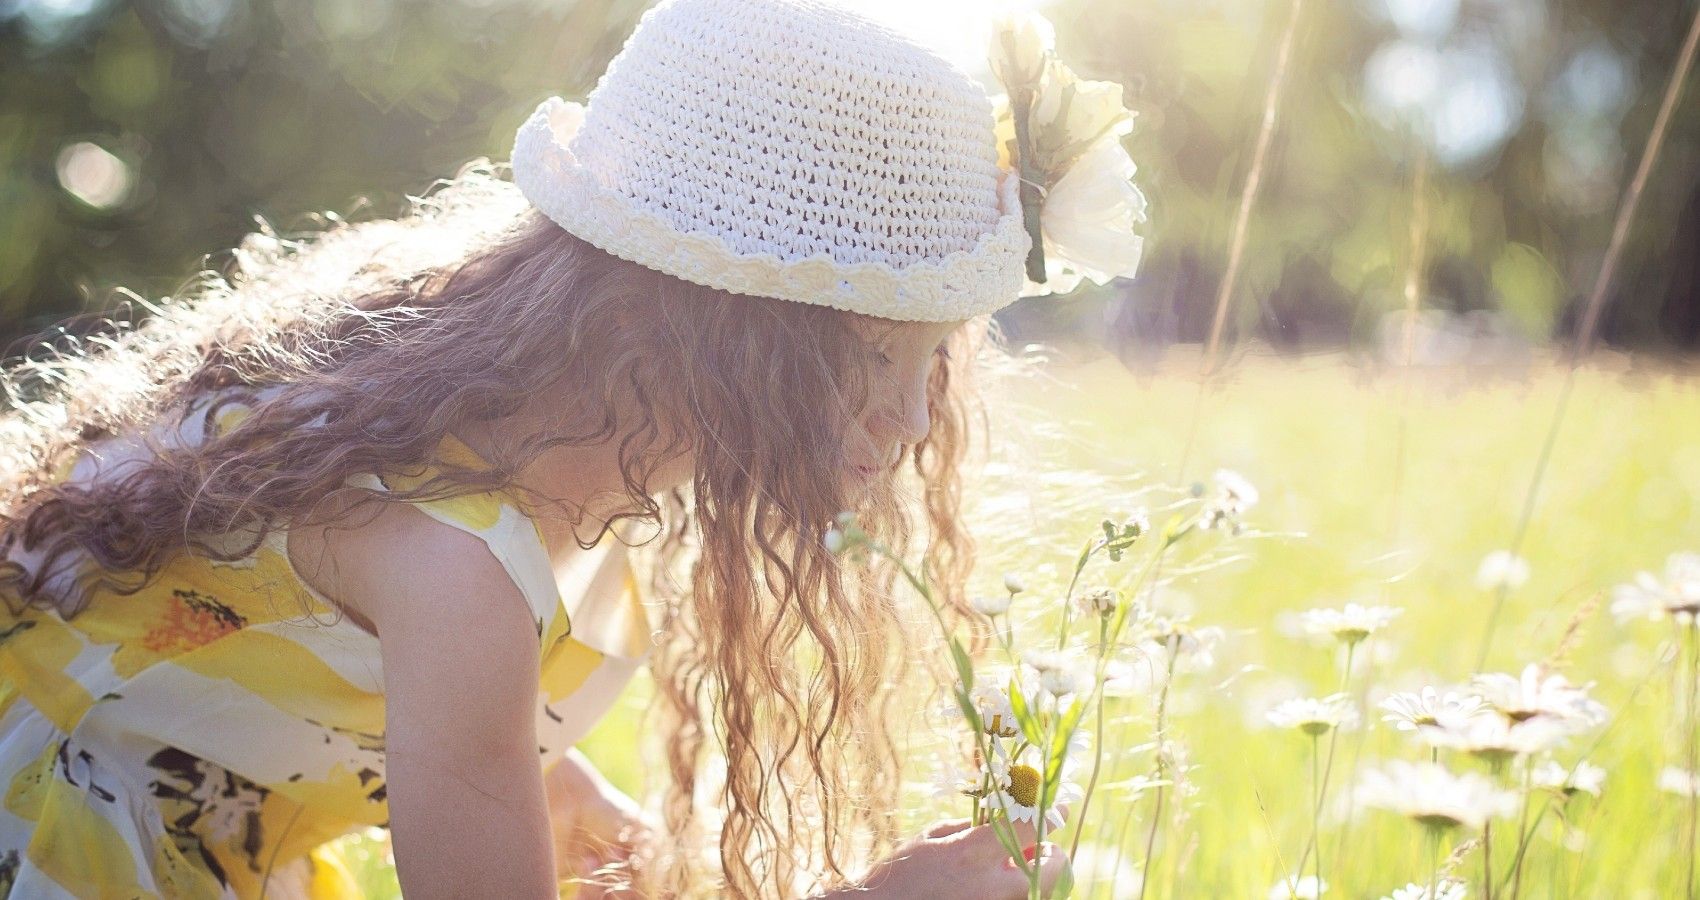 A child smelling flowers outside in the sun